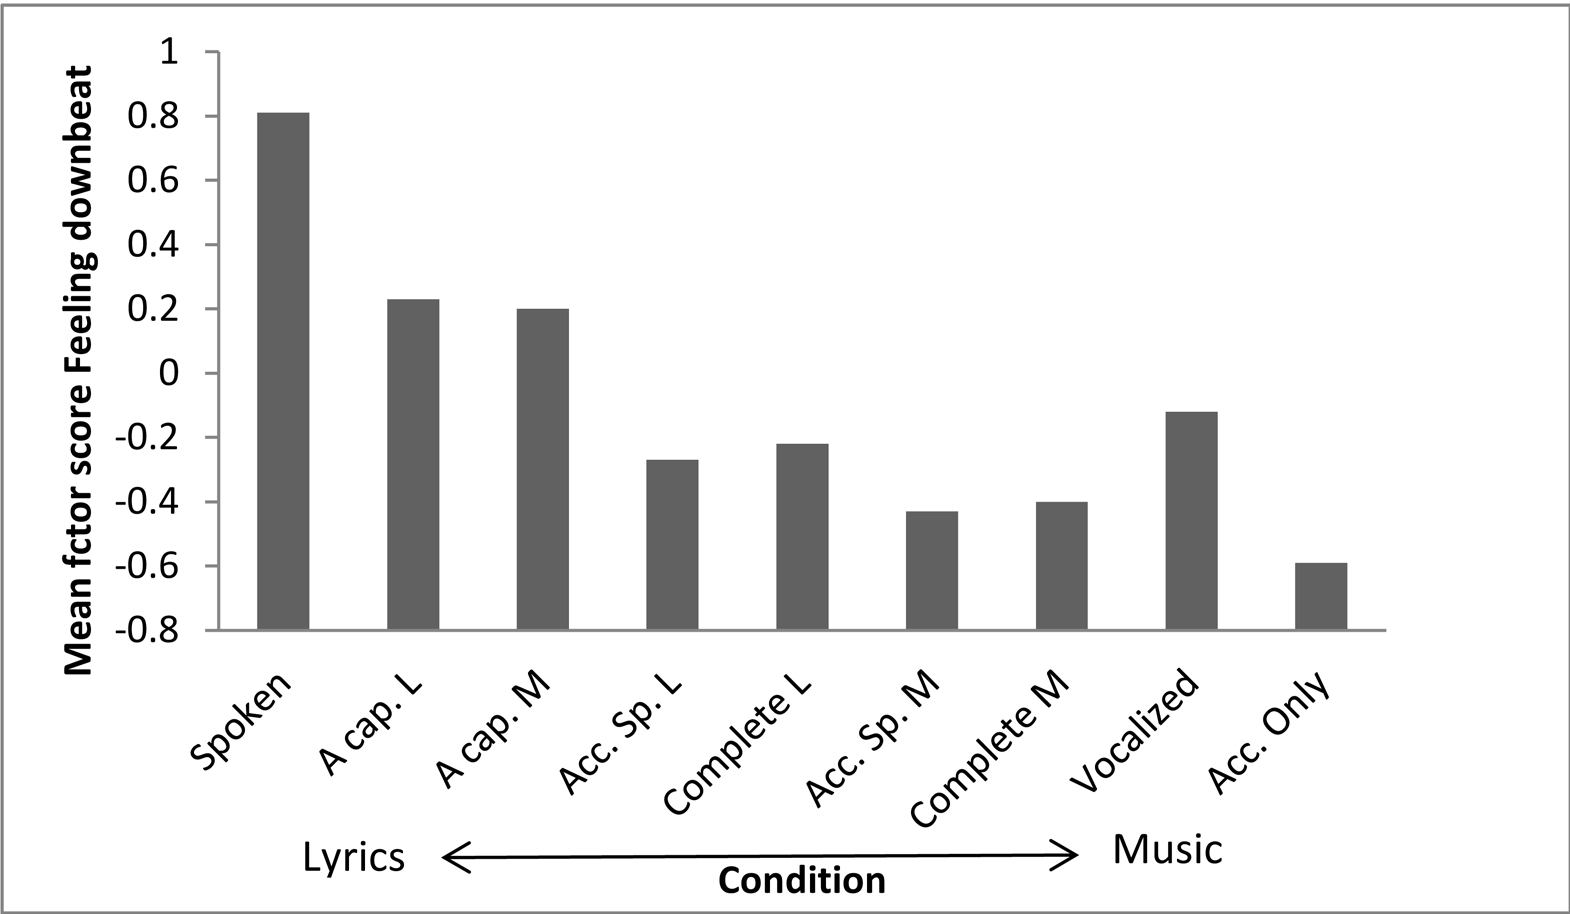 Bar graph depicting the mean score for feeling downbeat compared to the song condition, ranging from lyrics to music. More description above and below.